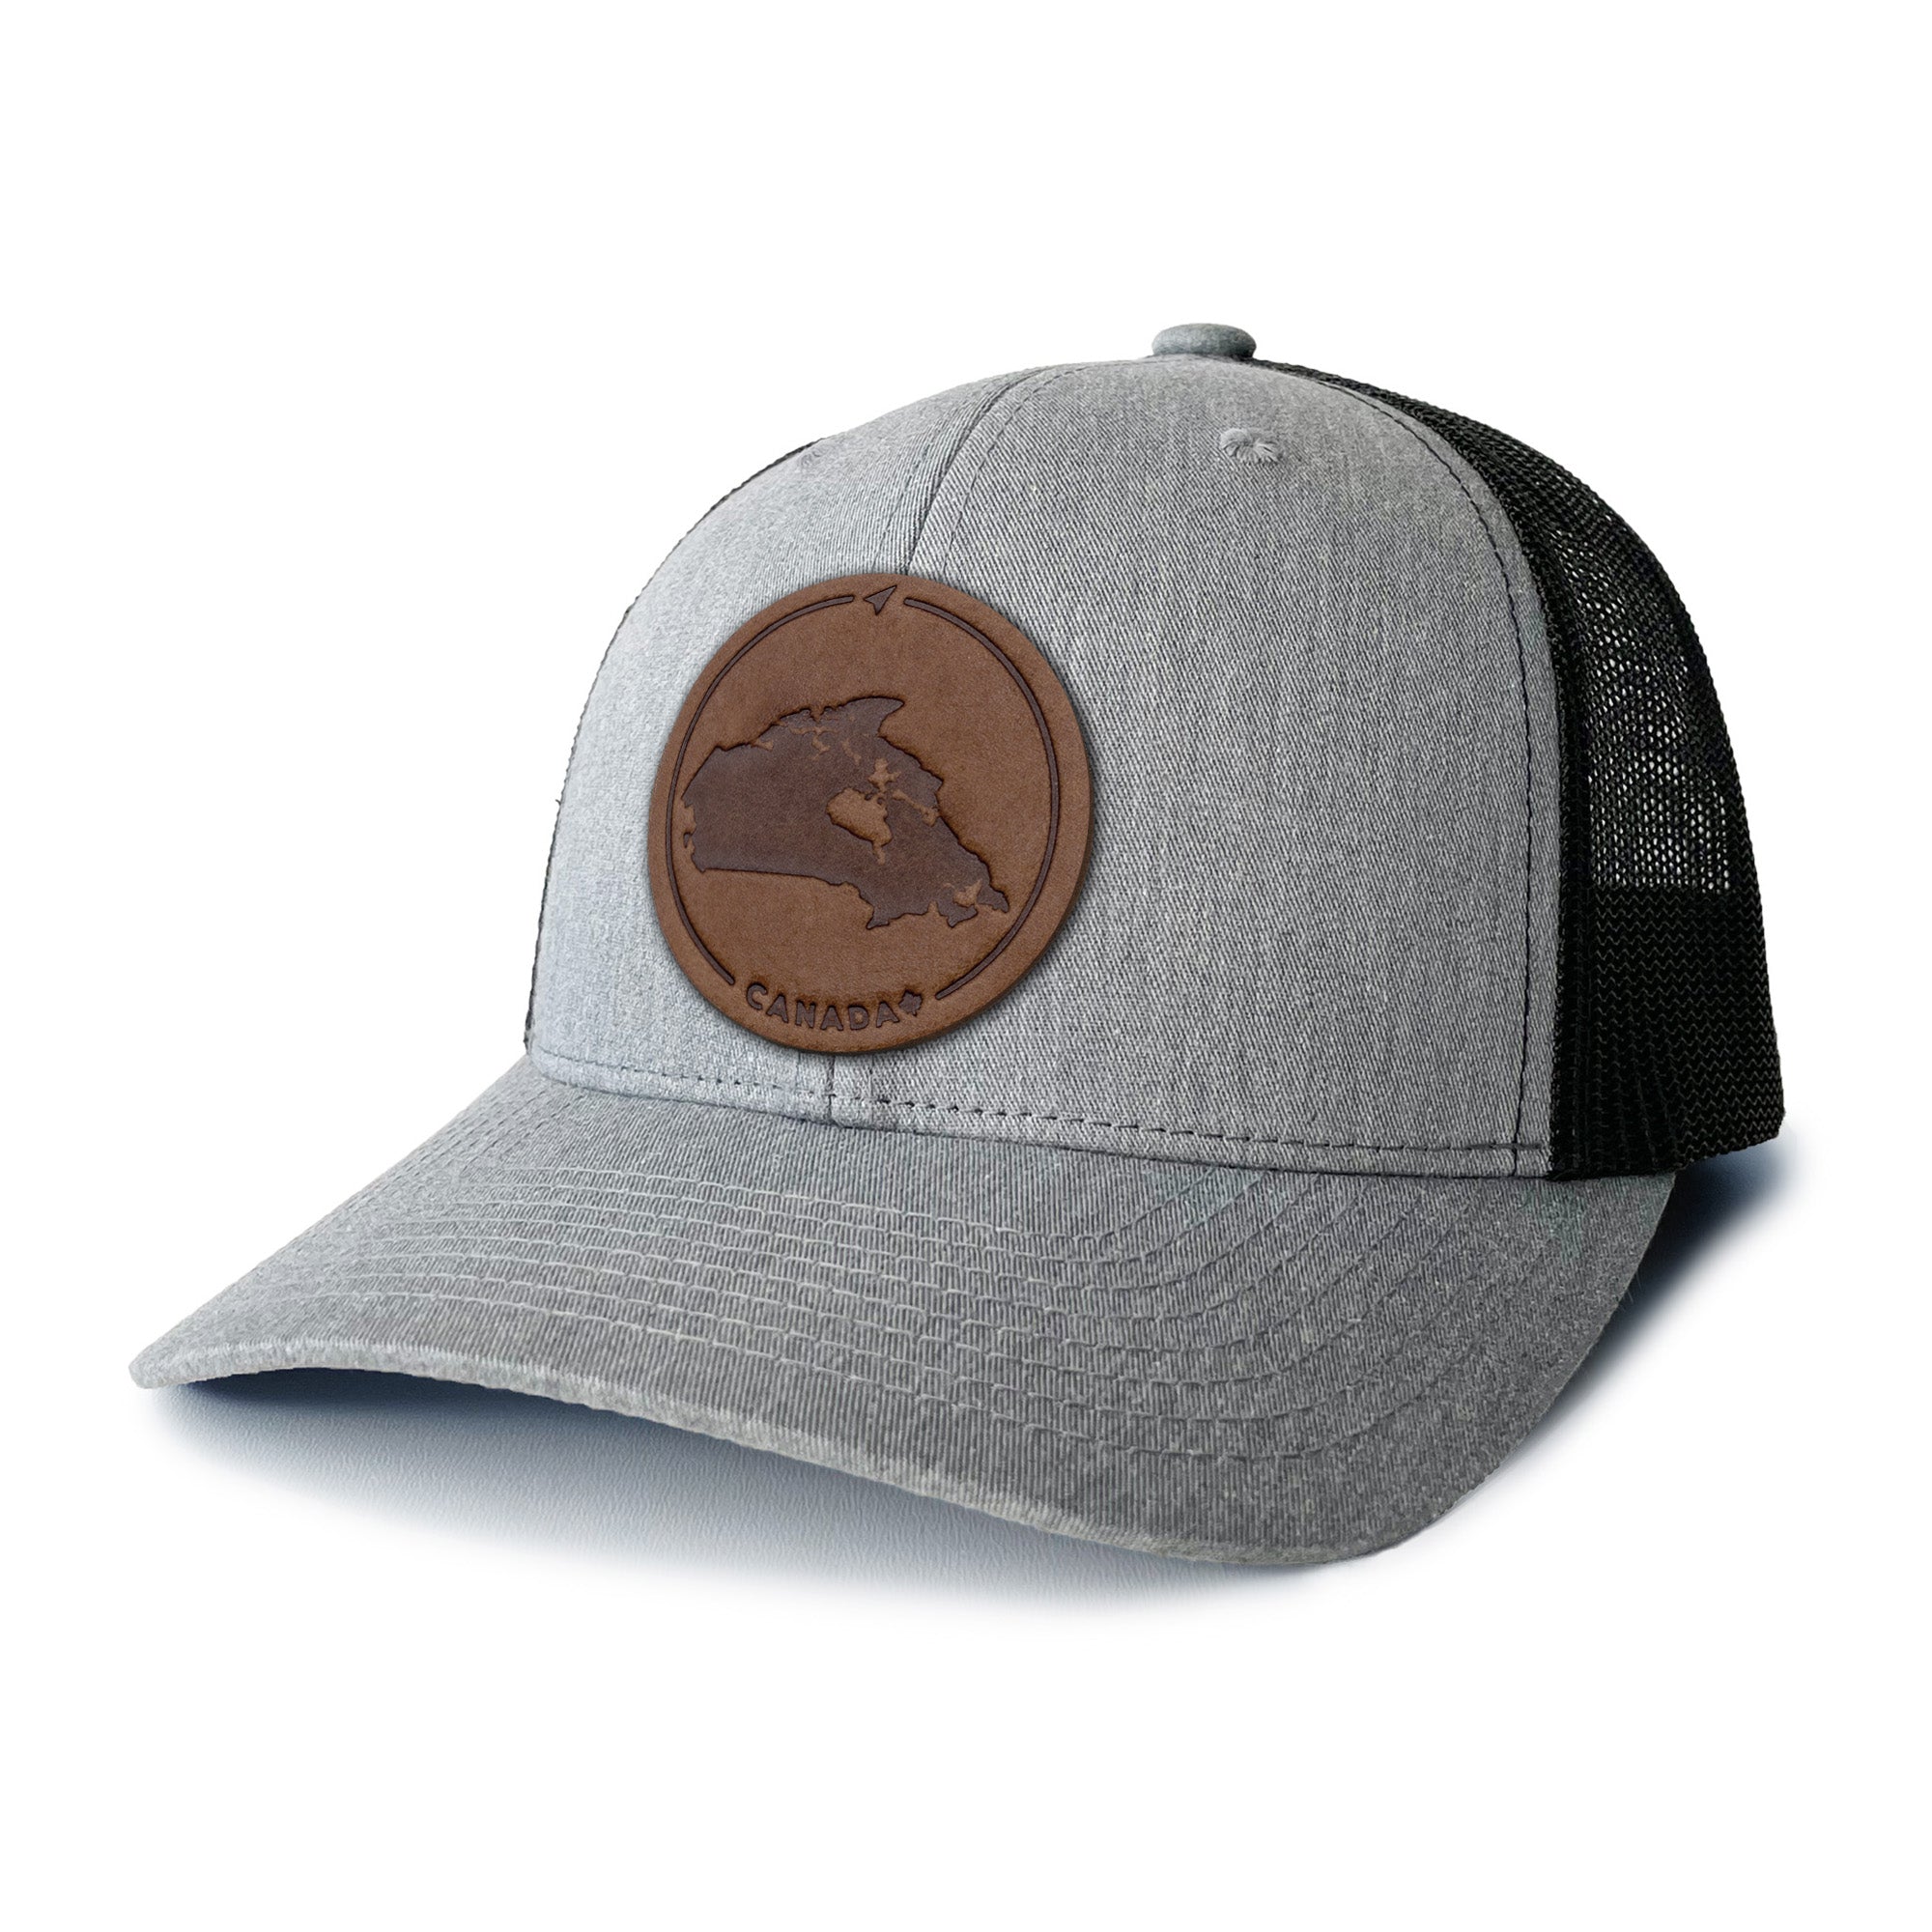 Heather Grey and white trucker hat with full-grain leather patch of Canada | BLACK-002-002, CHARC-002-002, NAVY-002-002, HGREY-002-002, MOSS-002-002, BROWN-002-002, RED-002-002